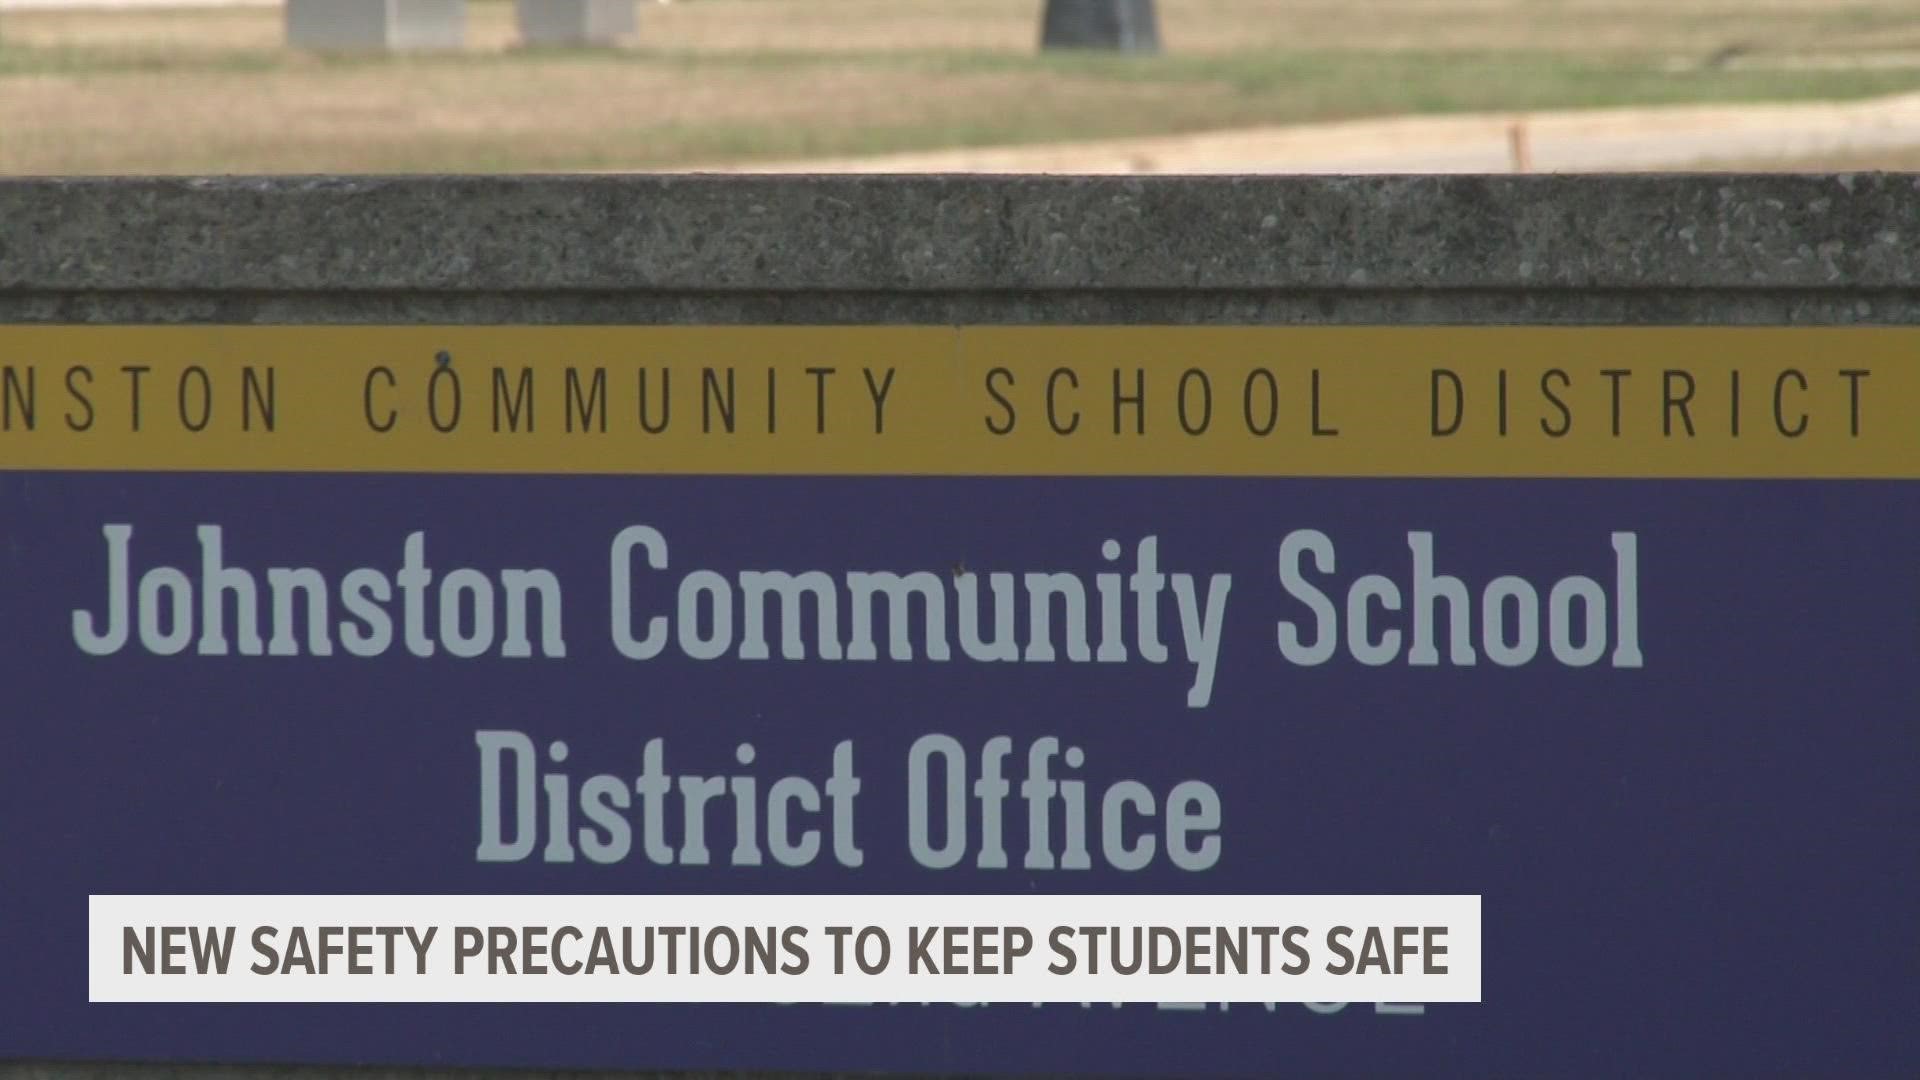 School districts across the metro are welcoming back students this morning into environments that have more safety precautions.